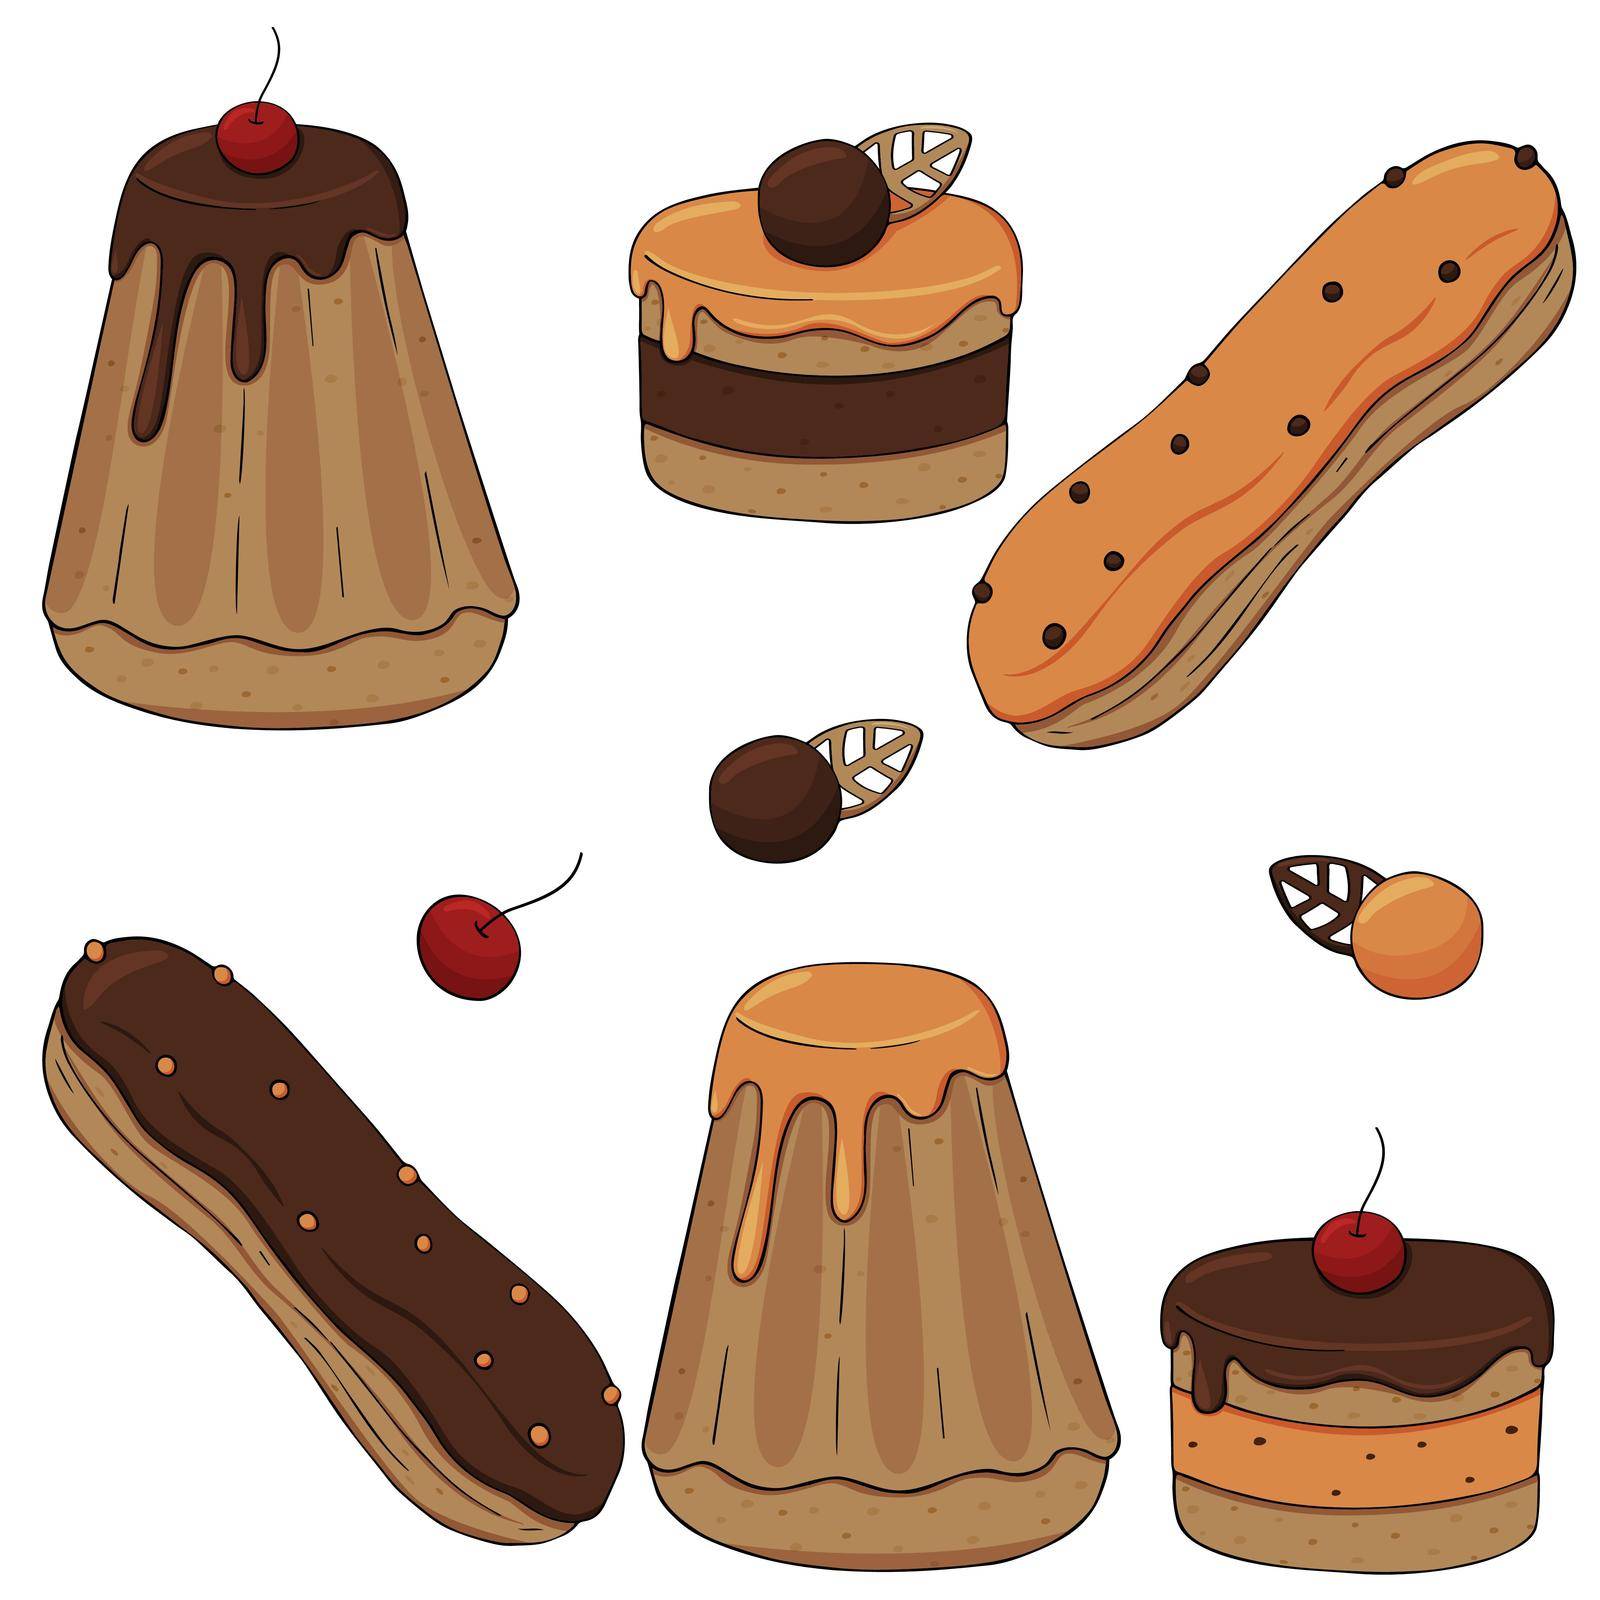 Chocolate caramel cream cakes with berries vector set on a white background